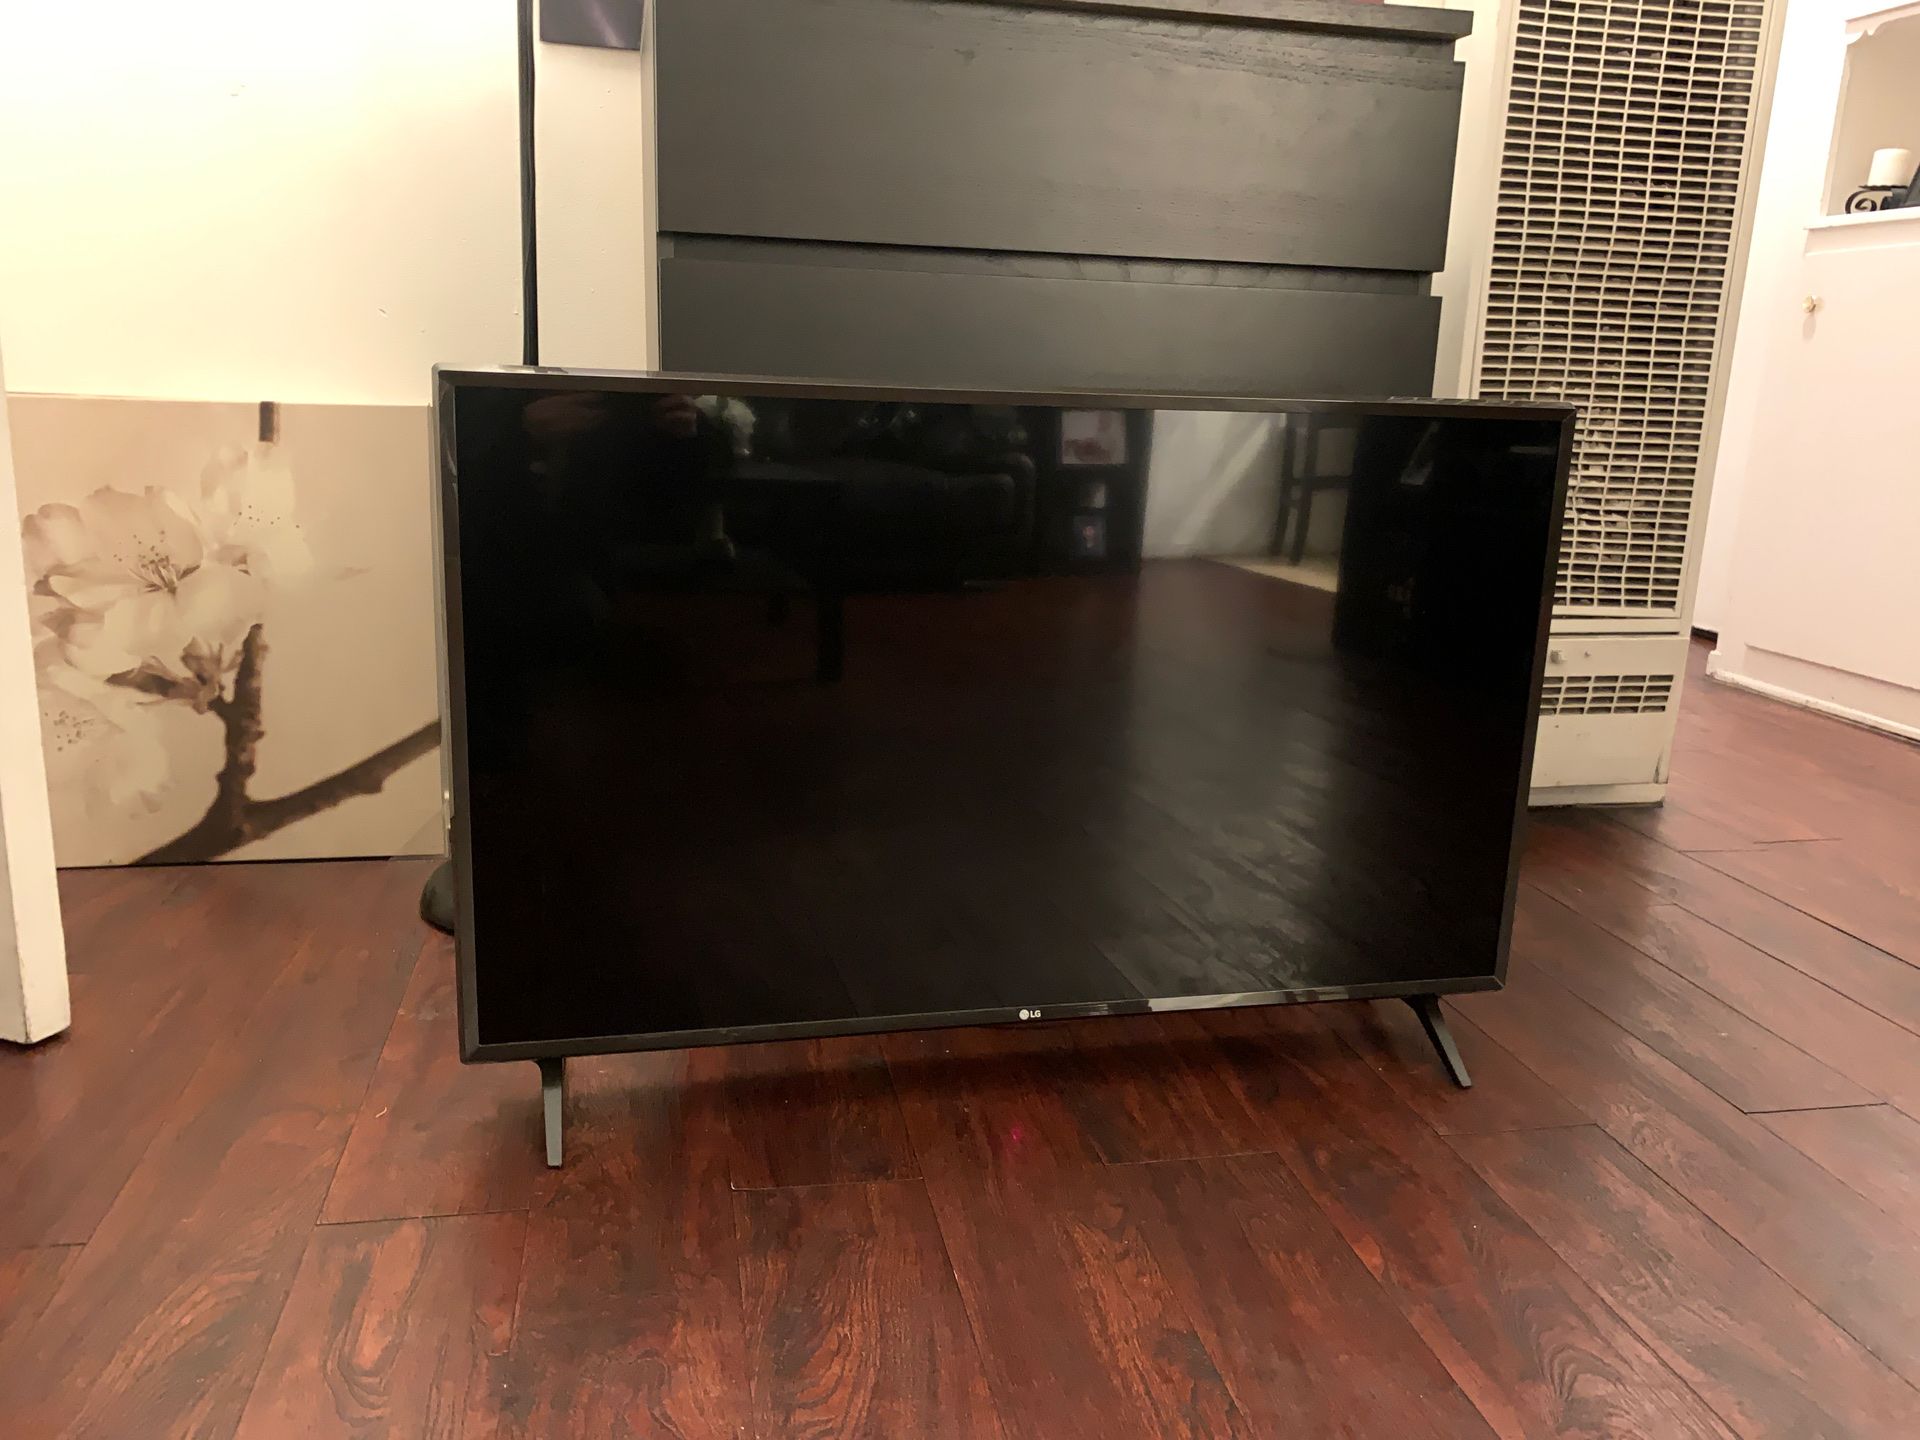 For sale LG 43” tv